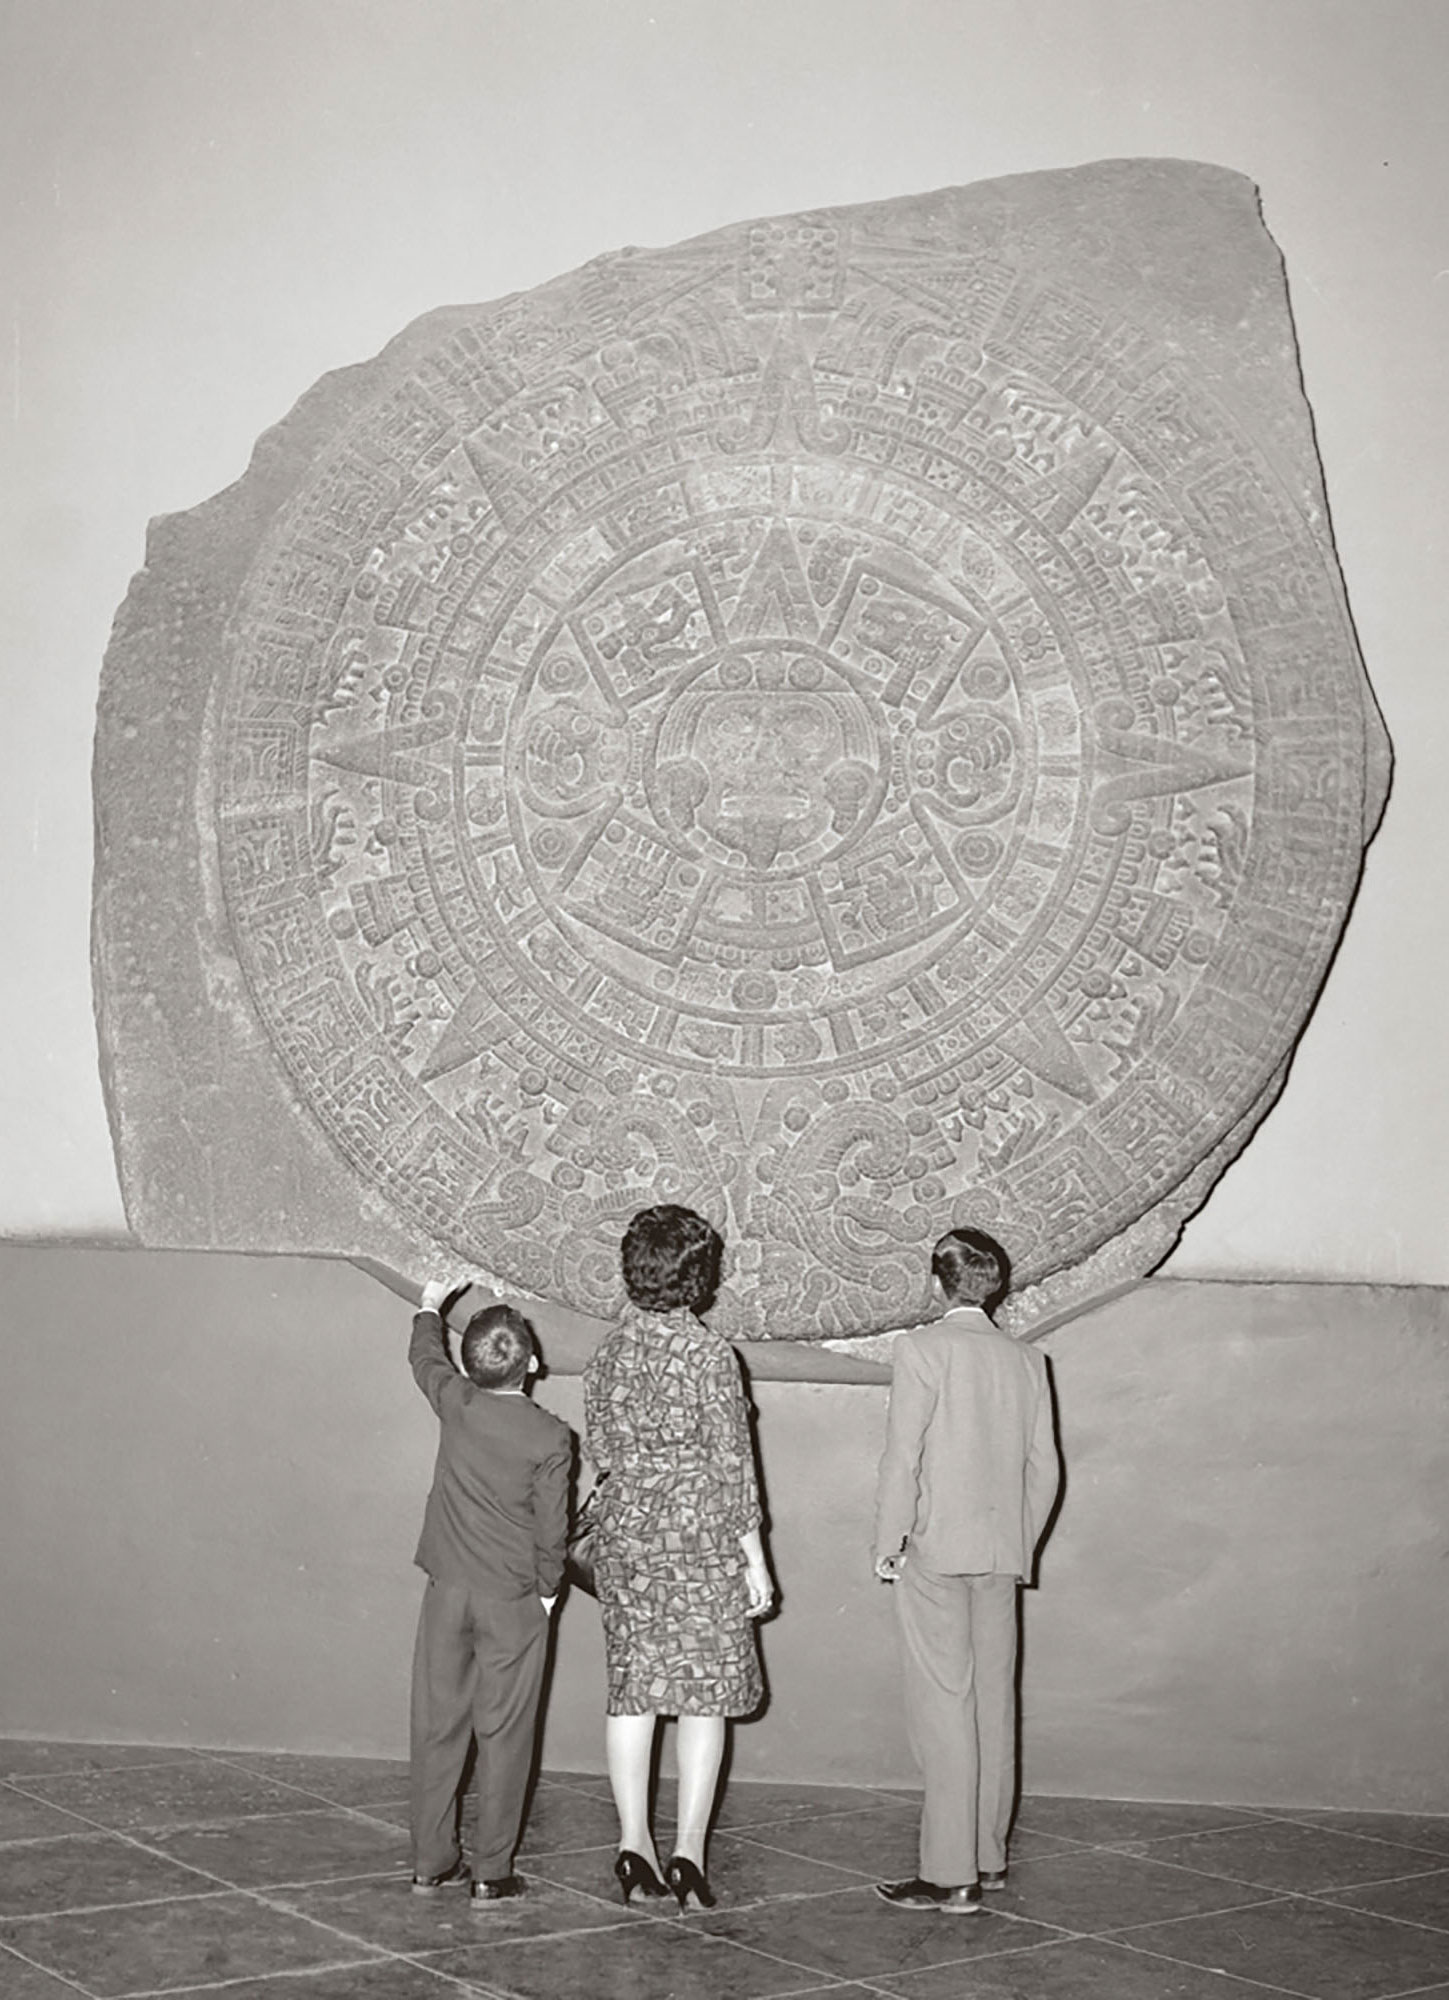 Aztec calendar and visitors at the National Museum of Anthropology, Mexico, DF, 1964. Photographer unknown. © 228834 Secretaria de Cultura. INAH. SINAFO. FN. Mexico. Reproduction authorised by INAH.